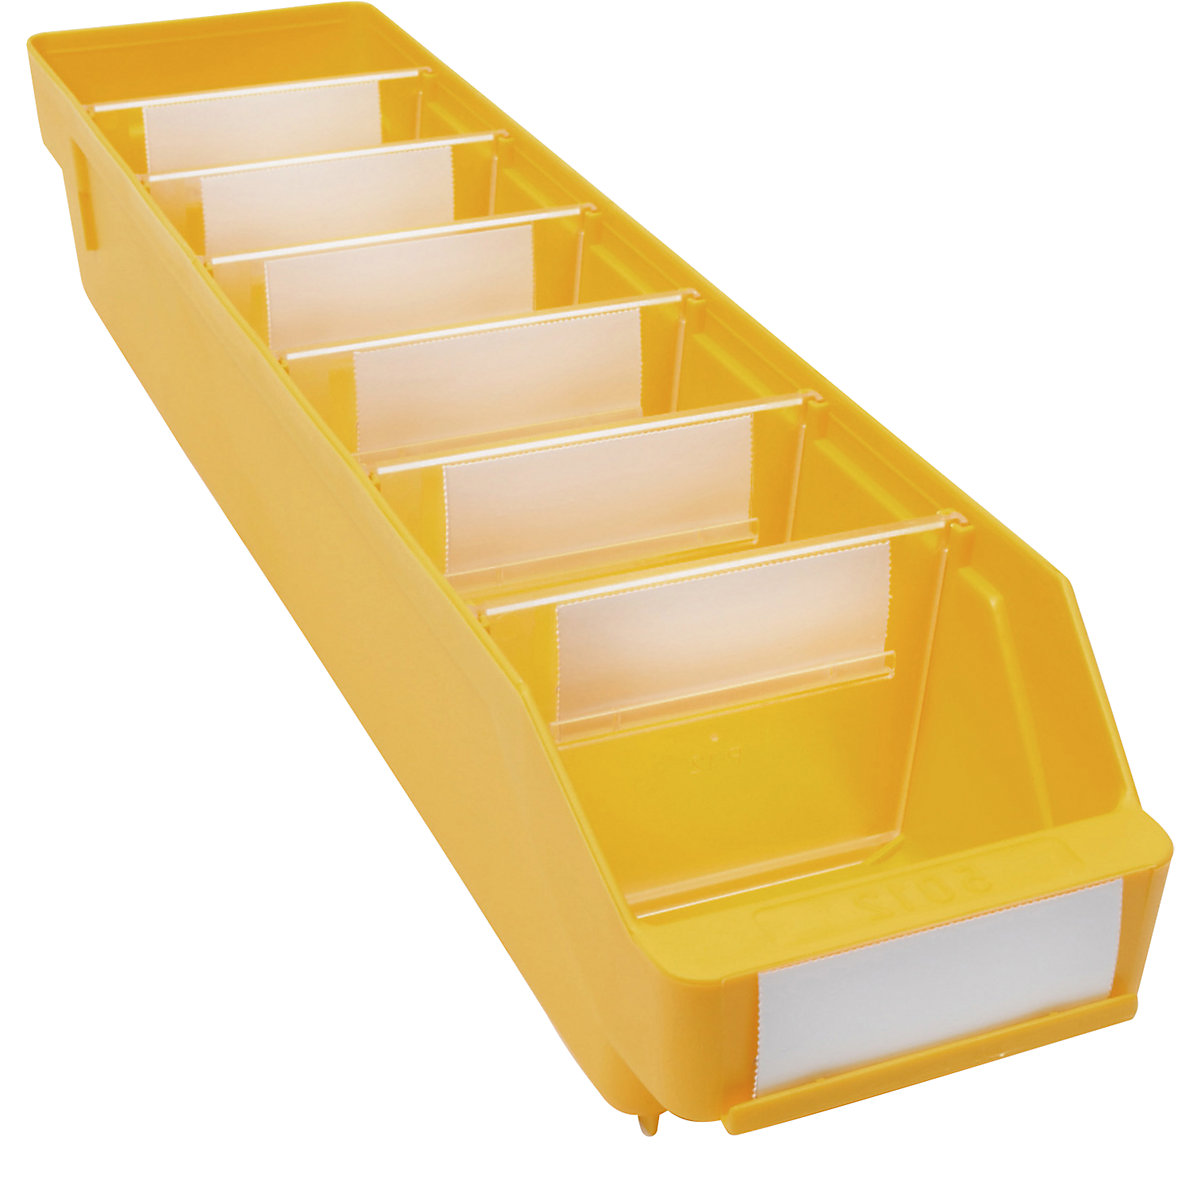 Shelf bin made of highly impact resistant polypropylene – STEMO, yellow, LxWxH 500 x 118 x 95 mm, pack of 30-19